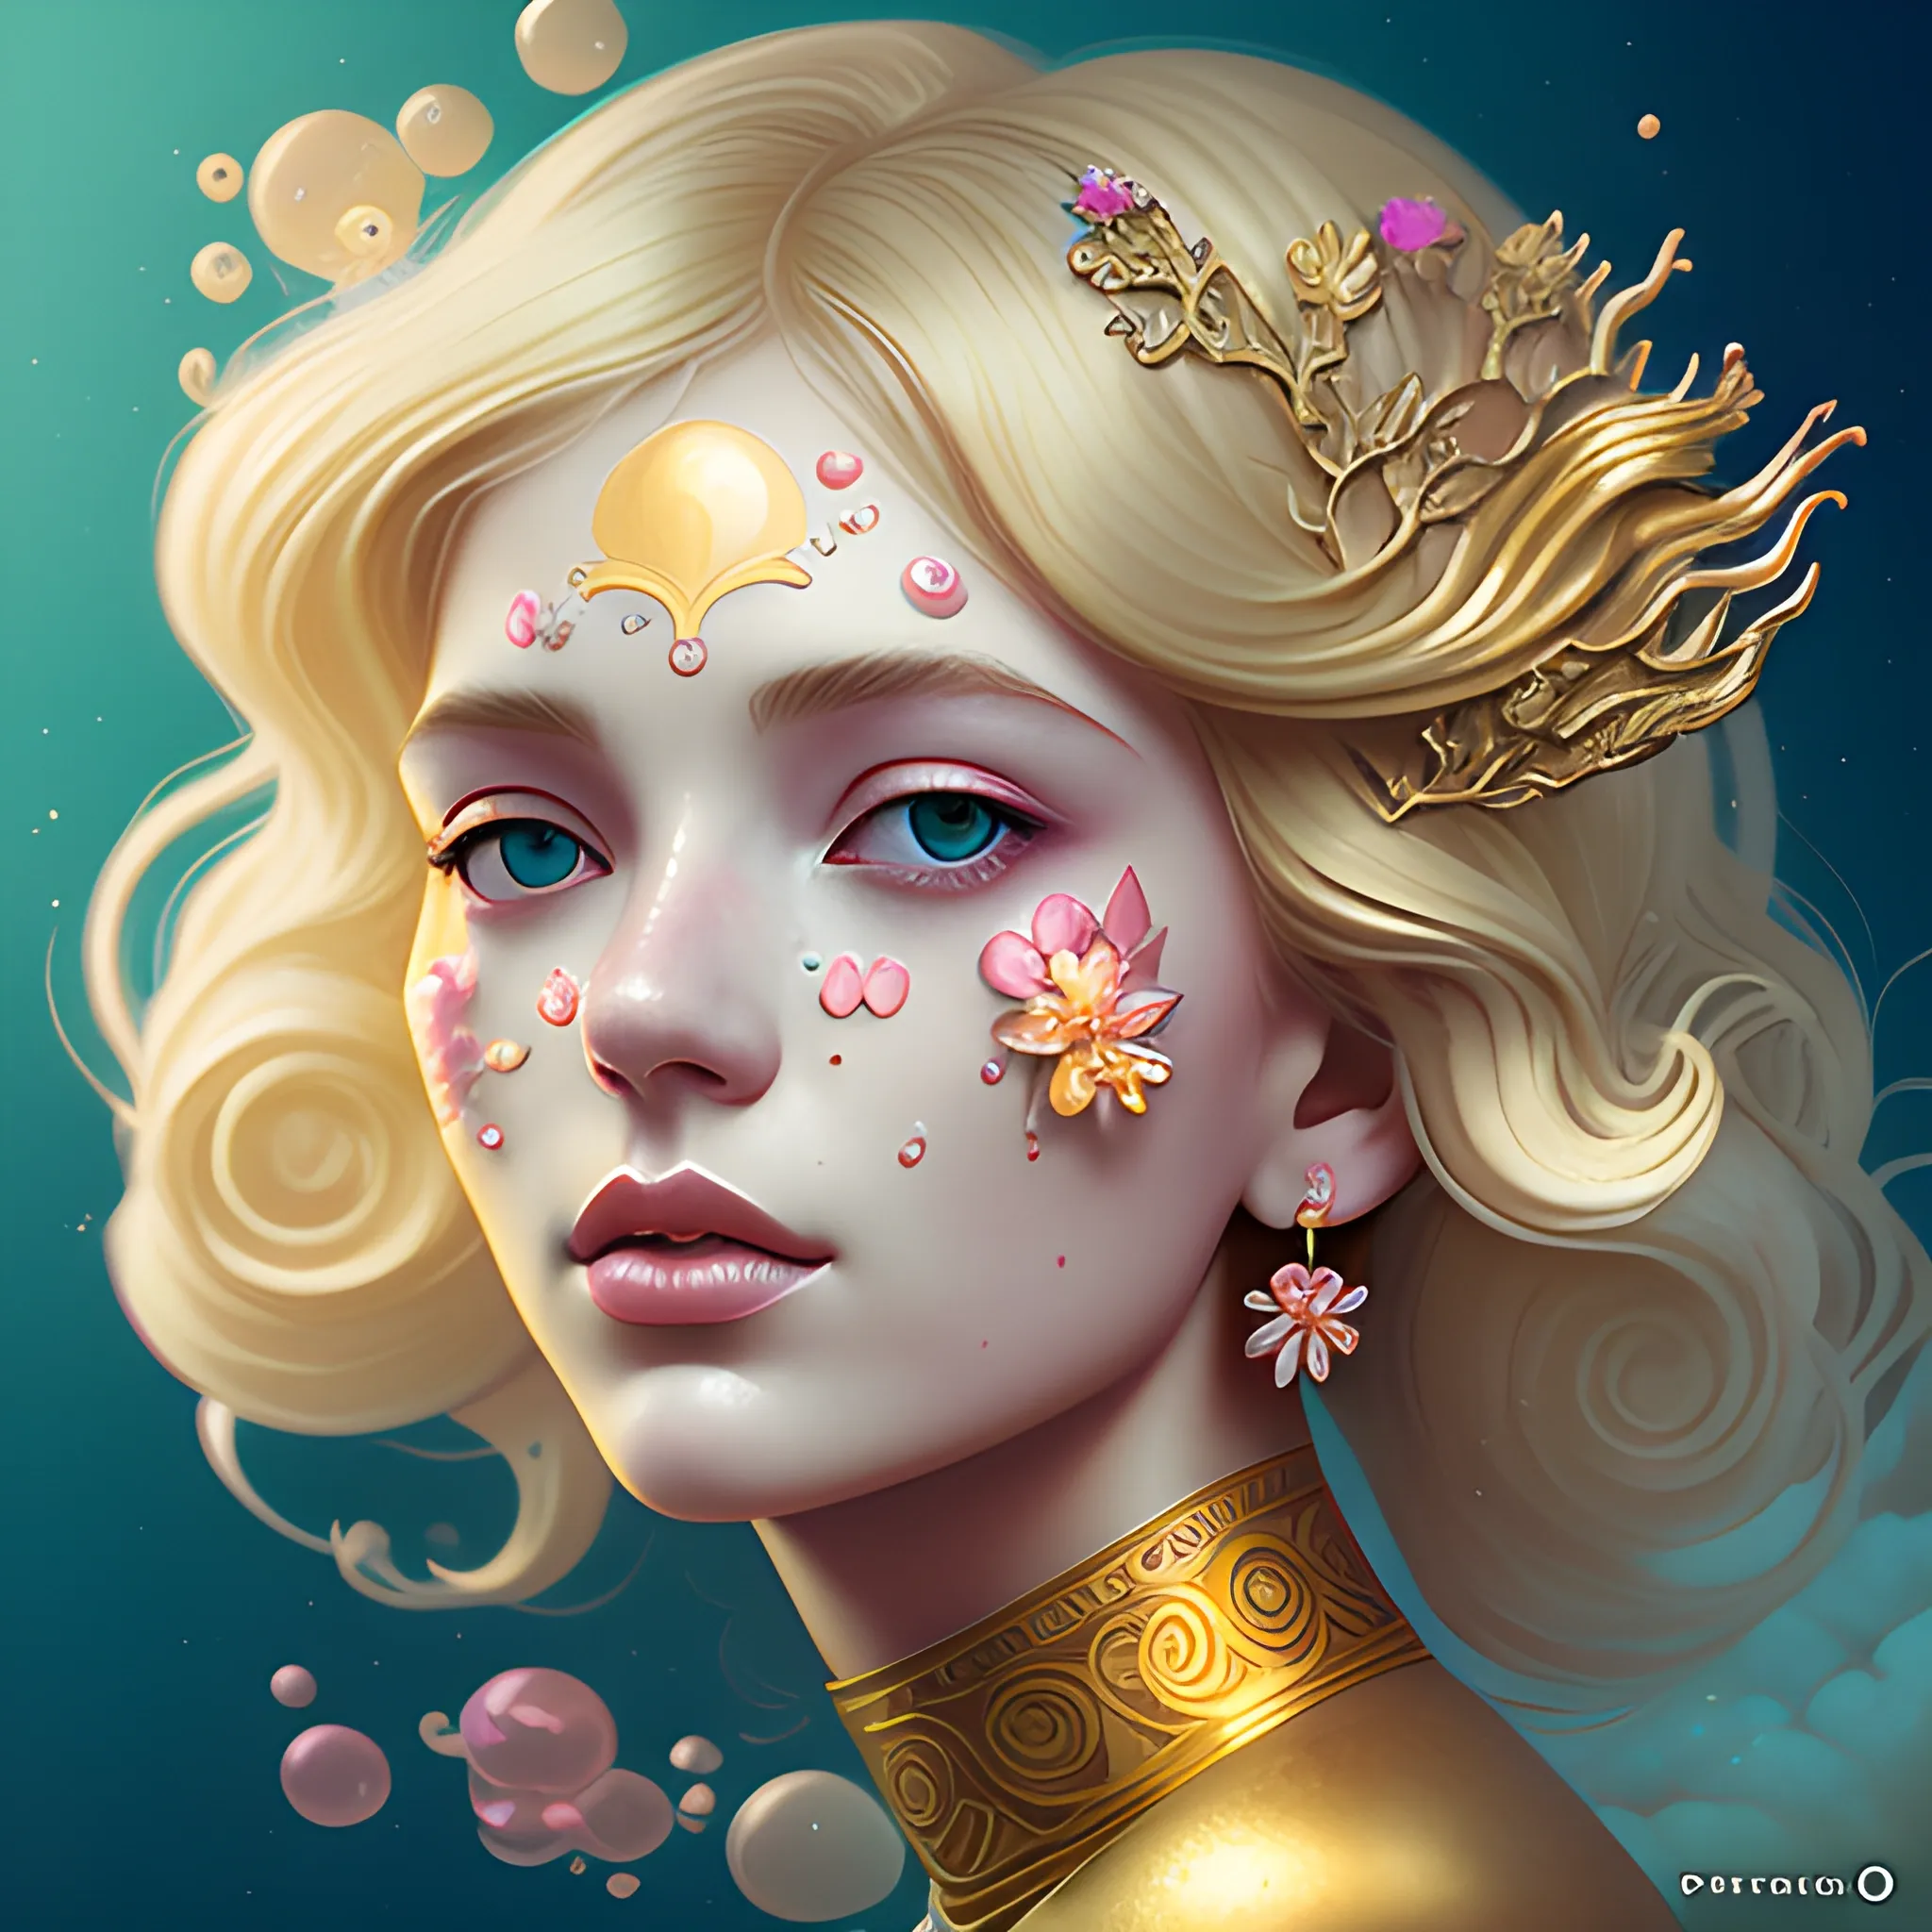 Flowery beautiful face blonde maiden with gold jewellery, by petros afshar, ross tran, Tom Bagshaw, tom whalen, underwater bubbly psychedelic clouds, Anaglyph 3D lens blur effect